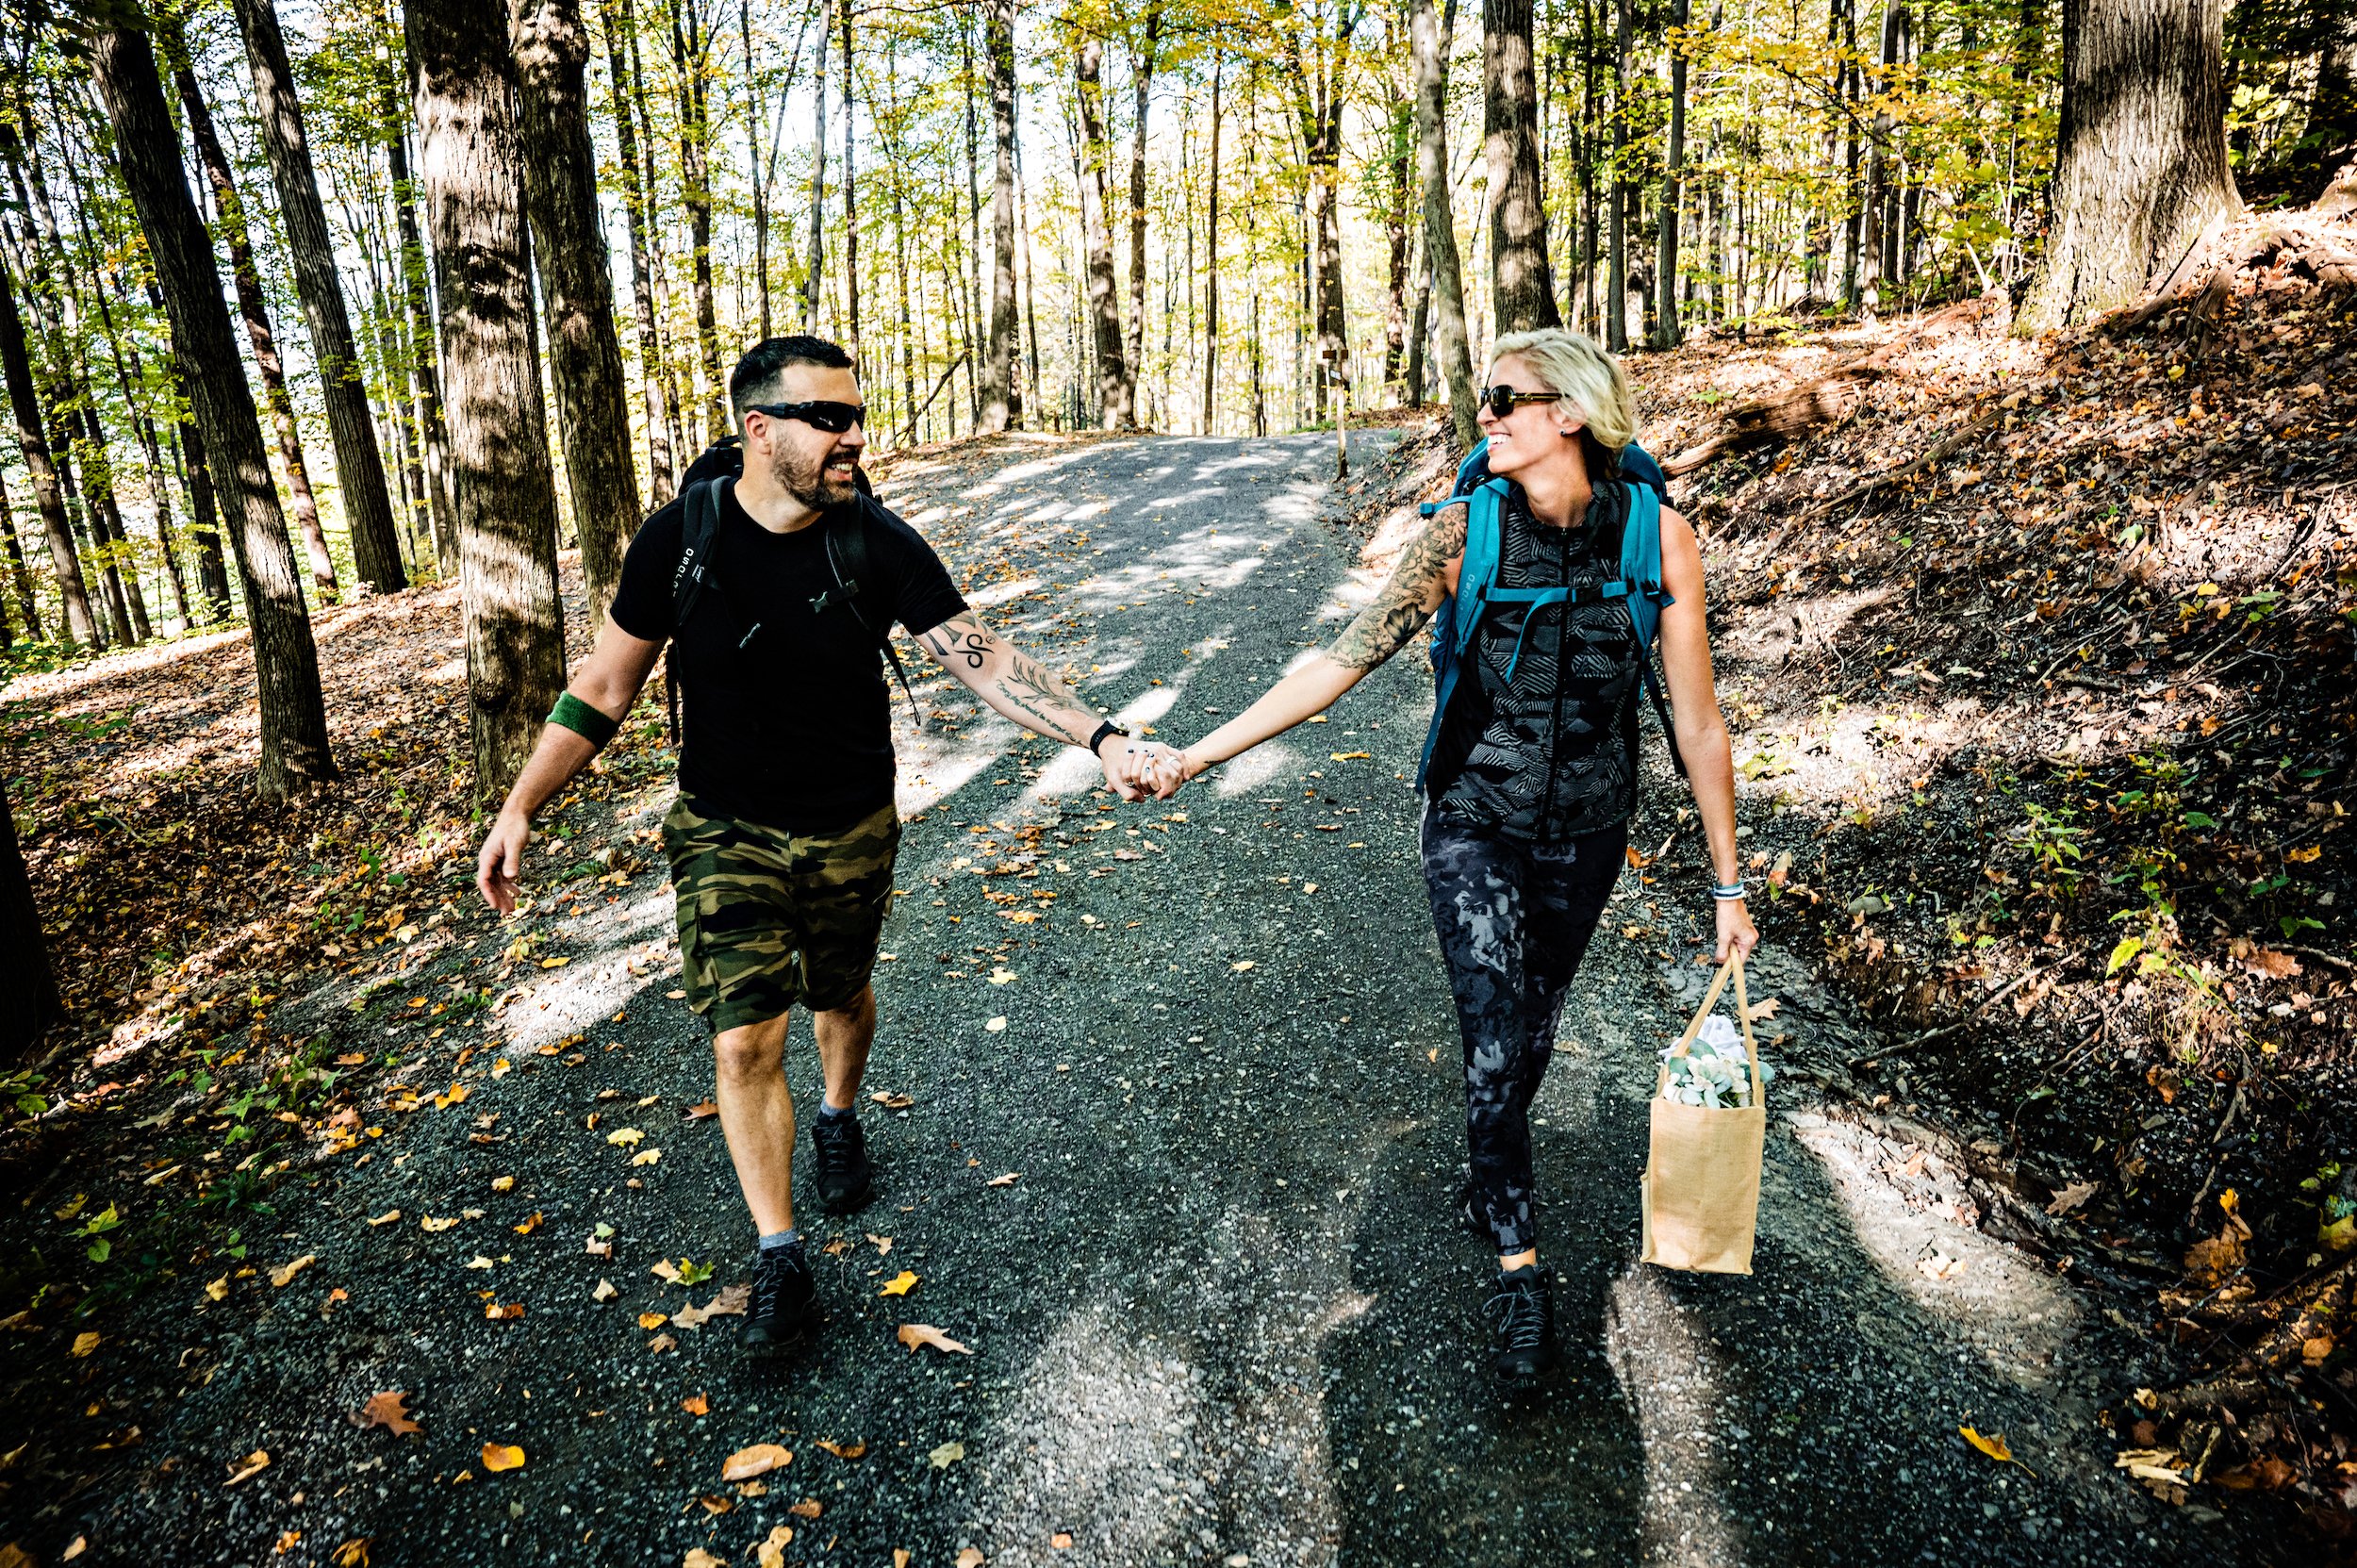 Jeff_Tisman_Photography_Jill_and_Mike_Vow_Renewal_2_Walking_the_Trail.jpg